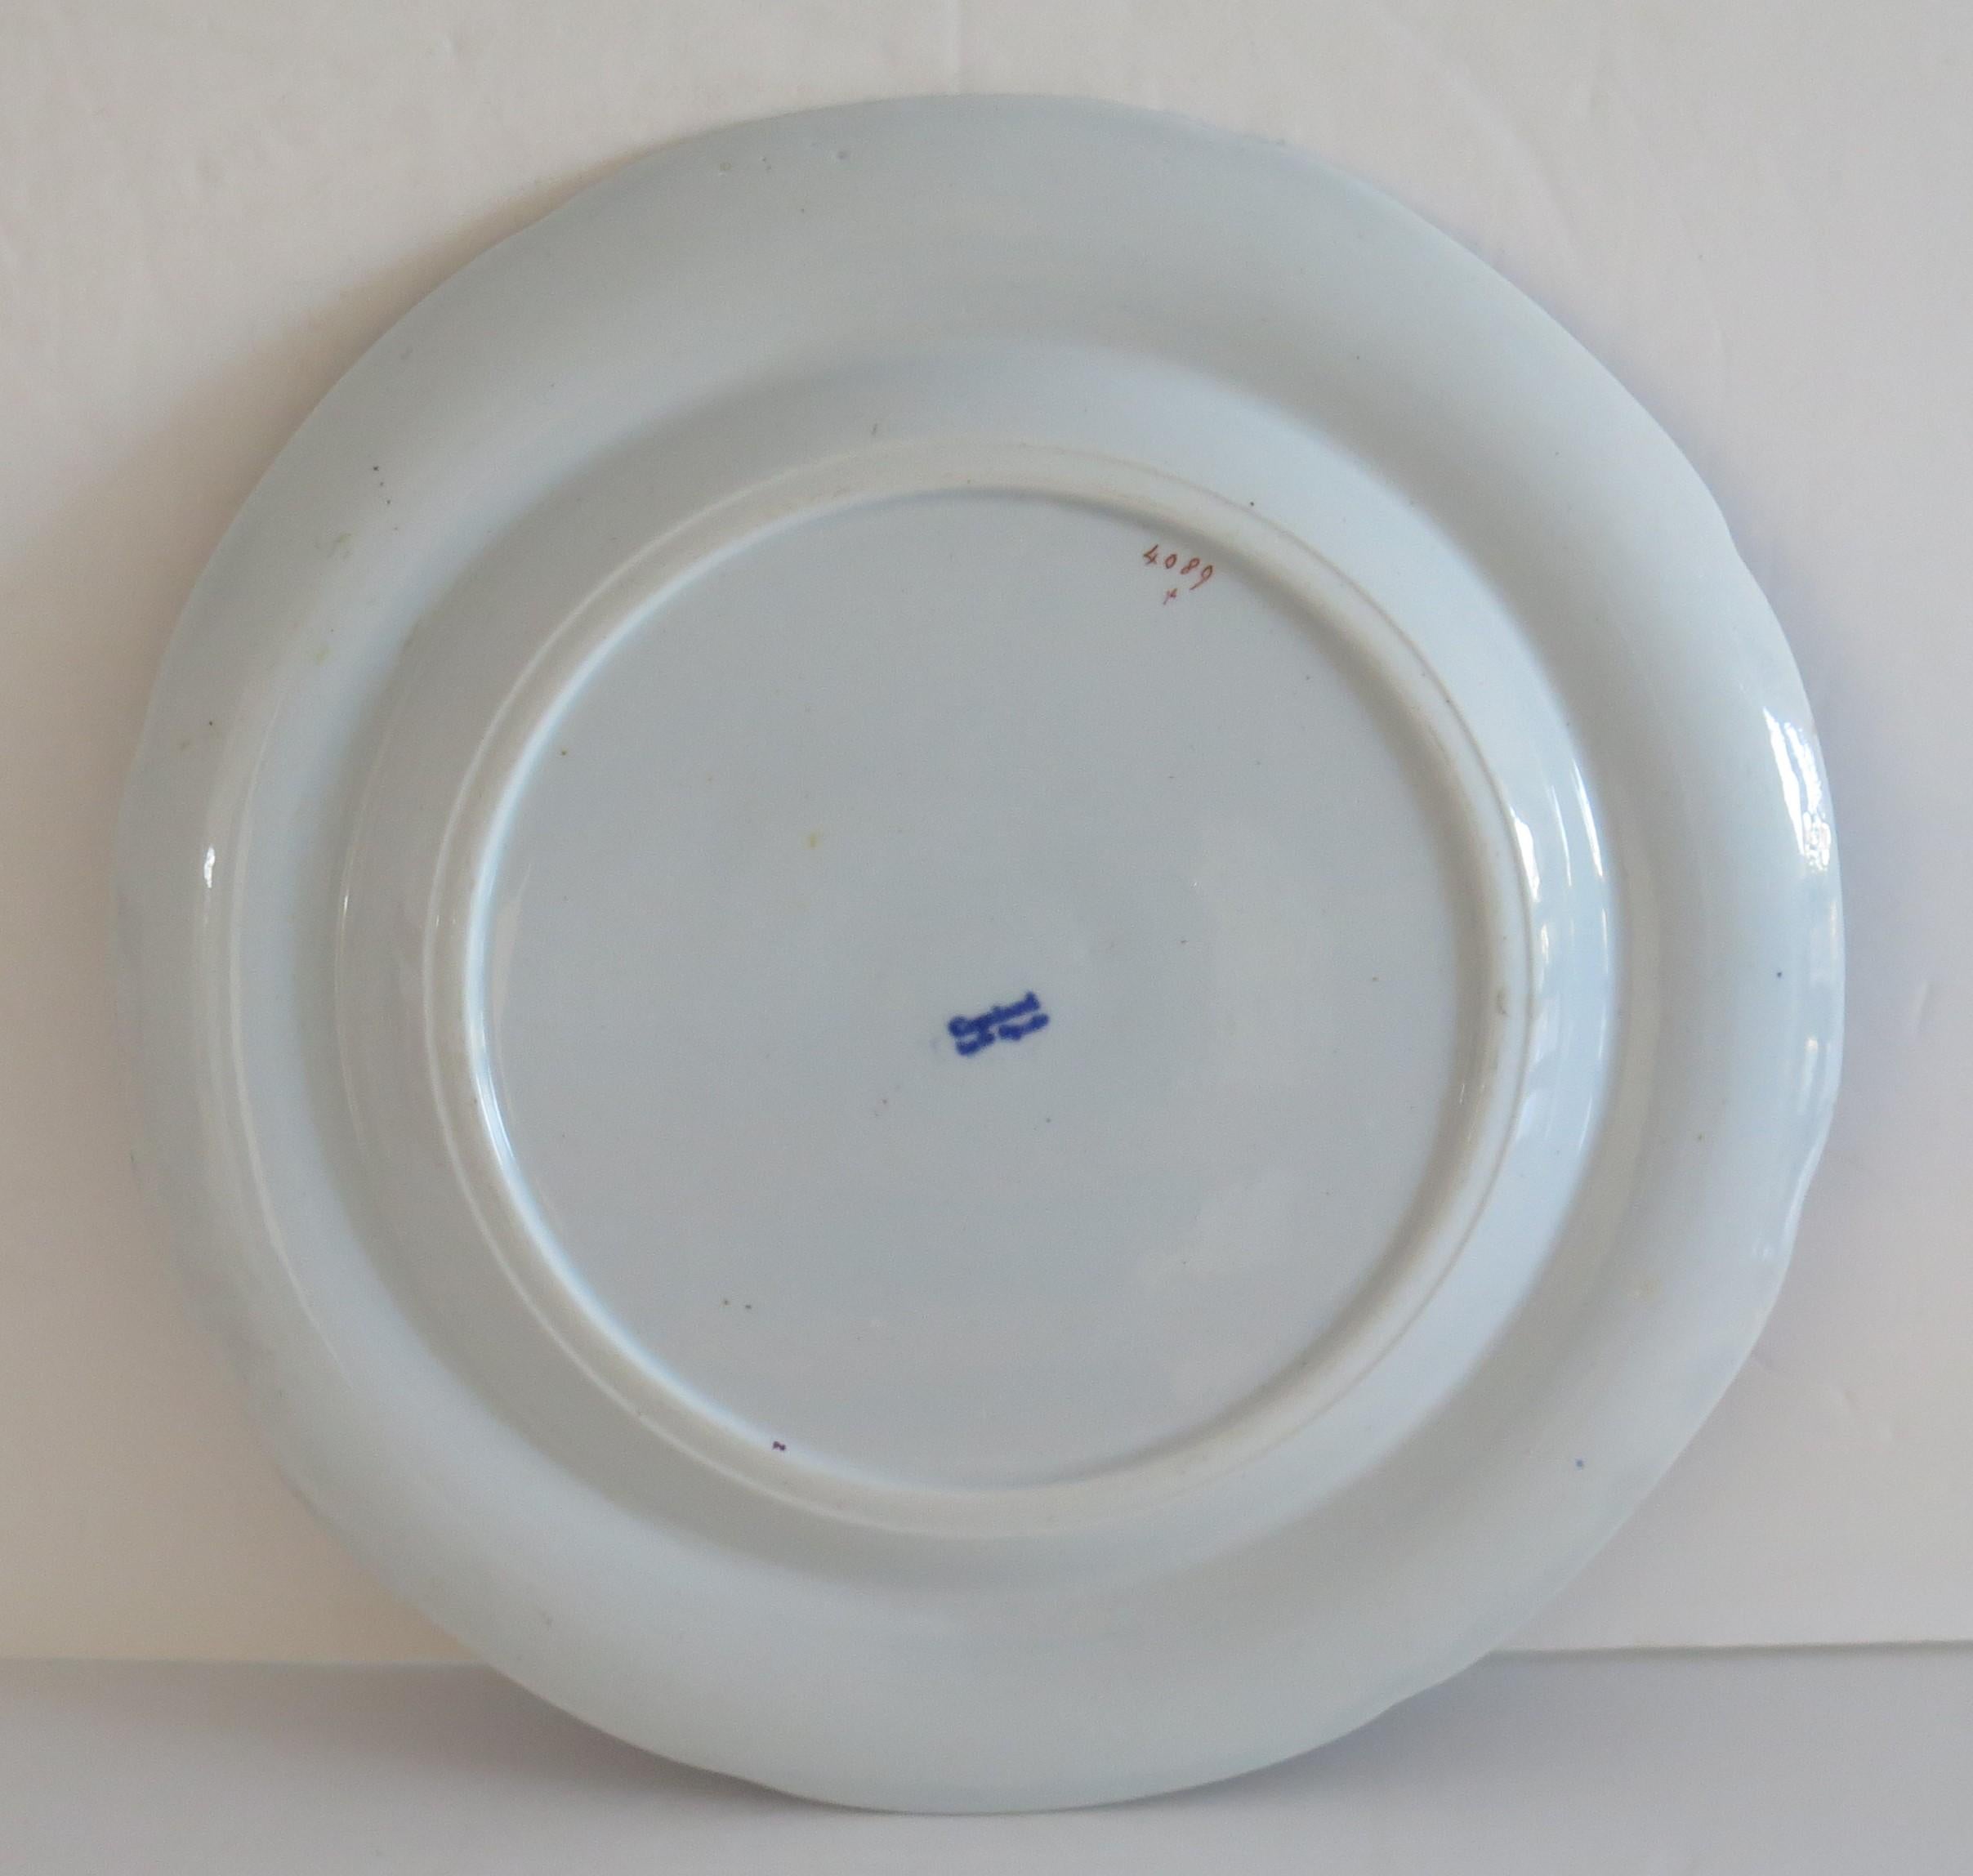 Hand-Painted Dinner Plate by Copeland Late Spode in Chinoiserie Pattern No. 4089, circa 1850 For Sale